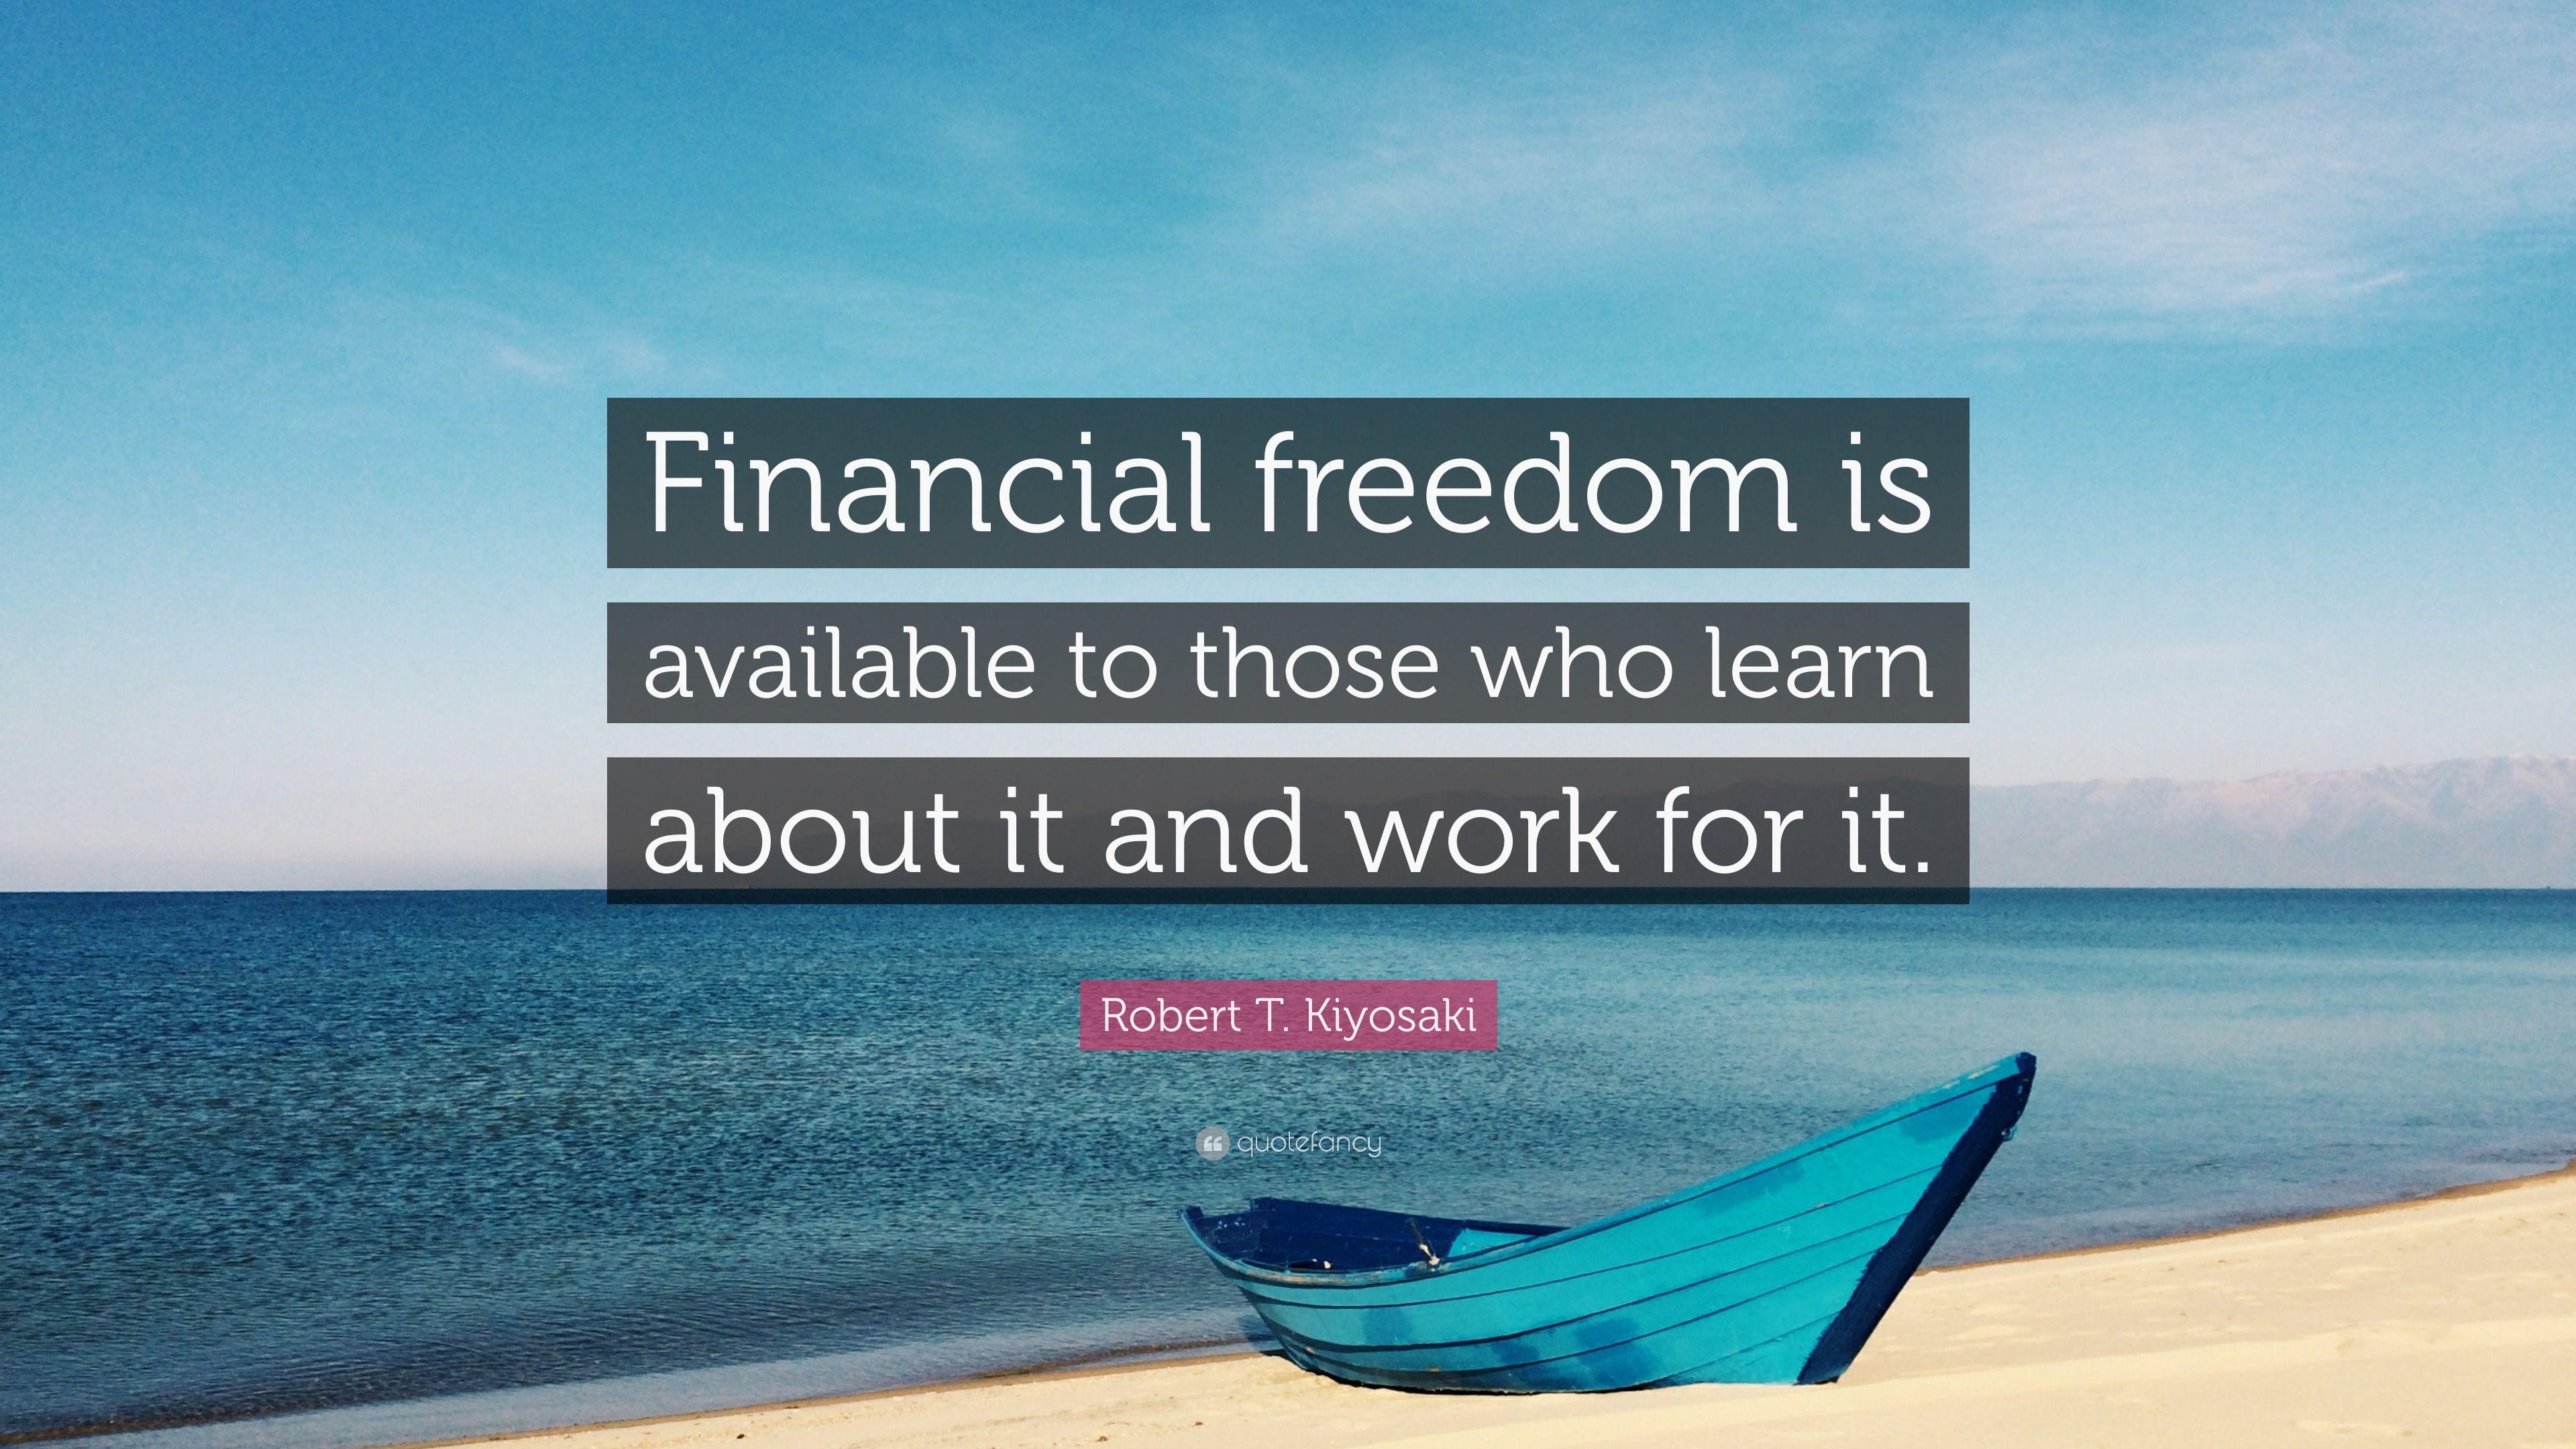 Robert T. Kiyosaki Quote: “Financial freedom is available to those who